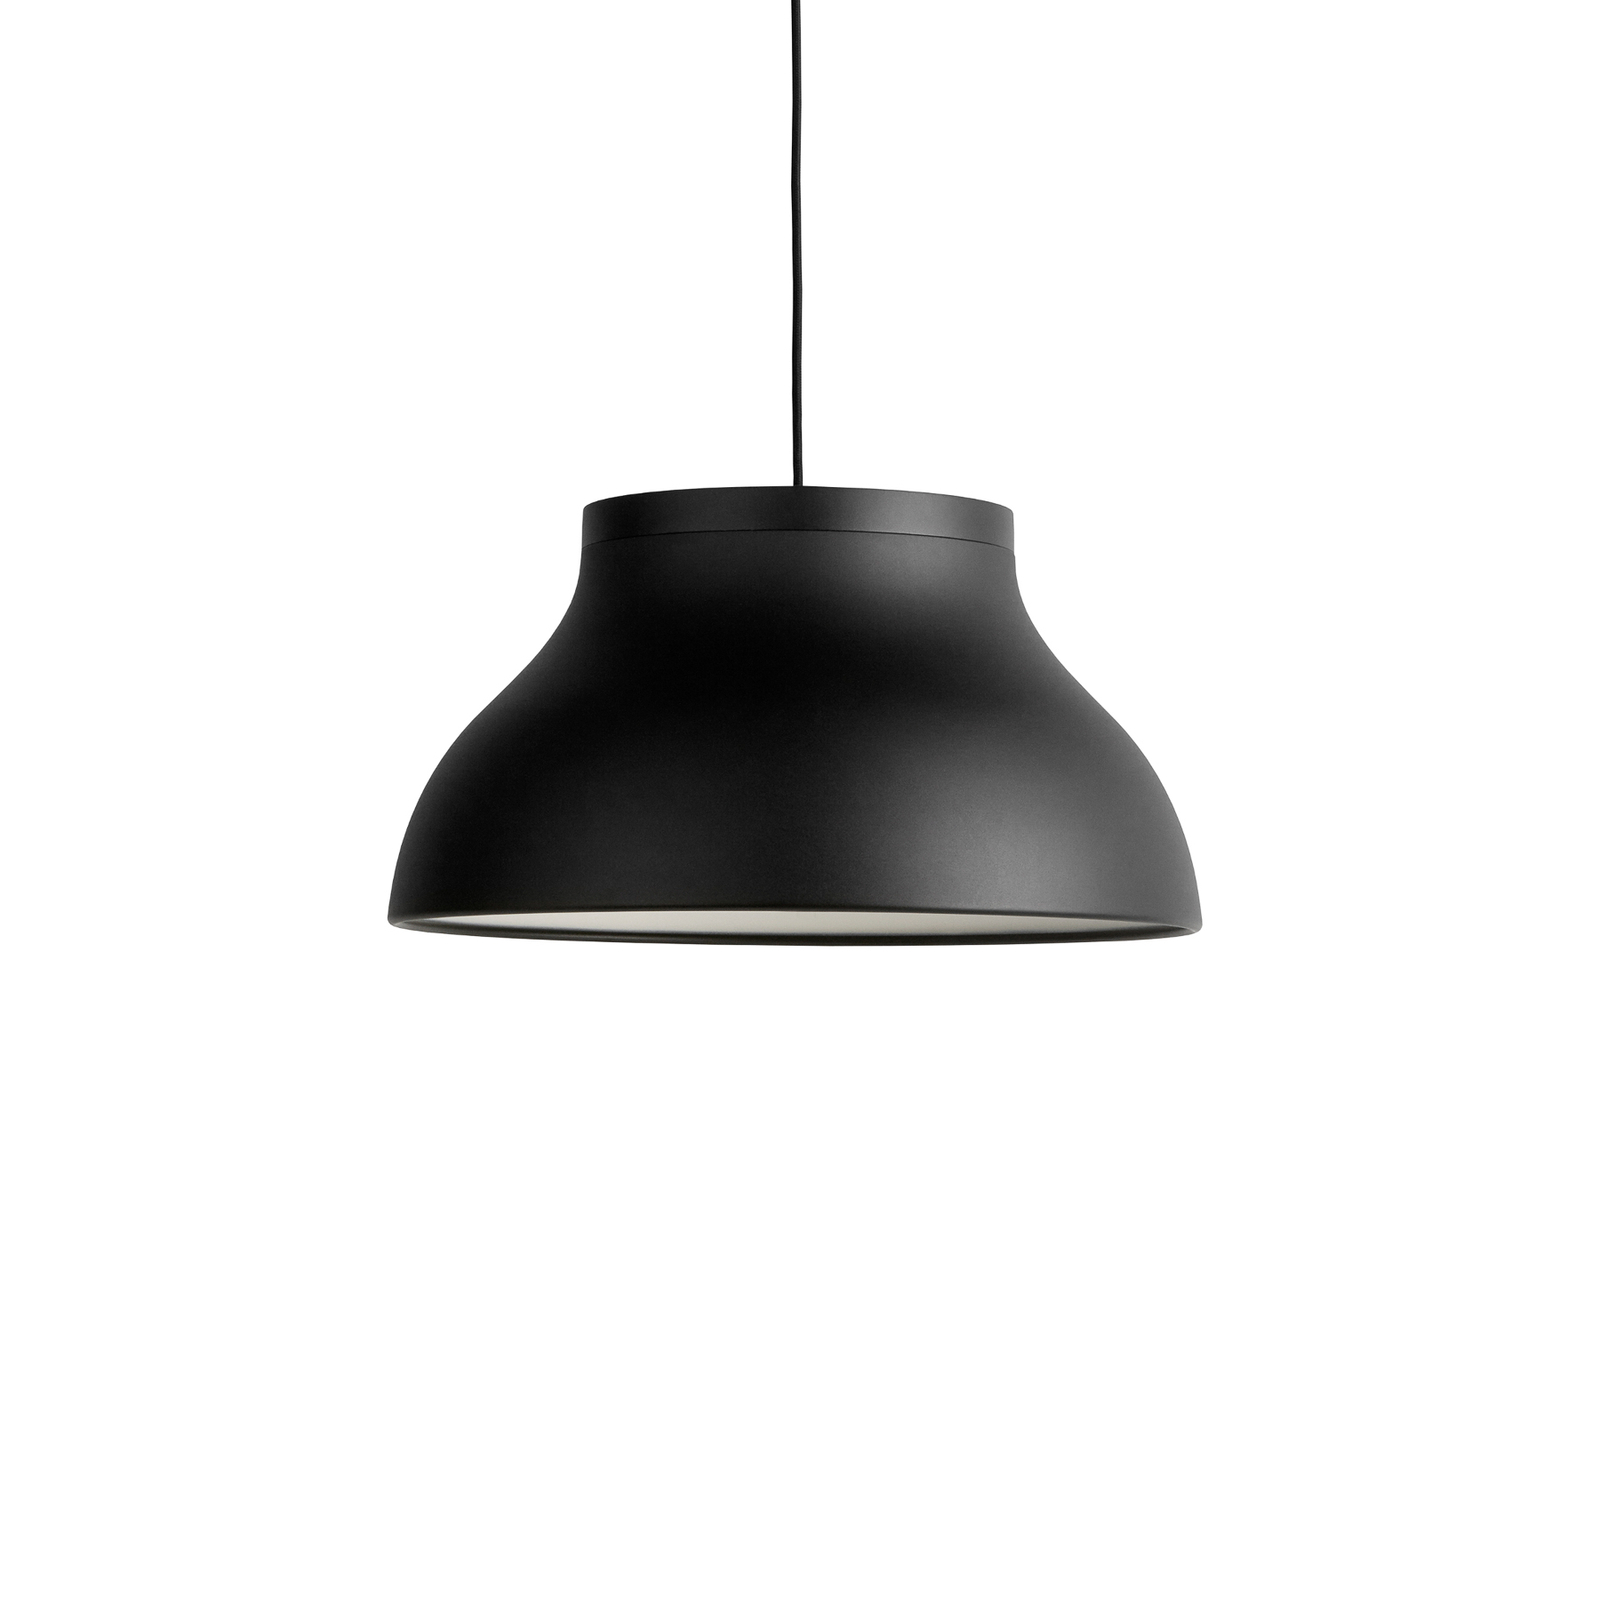 HAY PC M pendant light with a diffuser, black